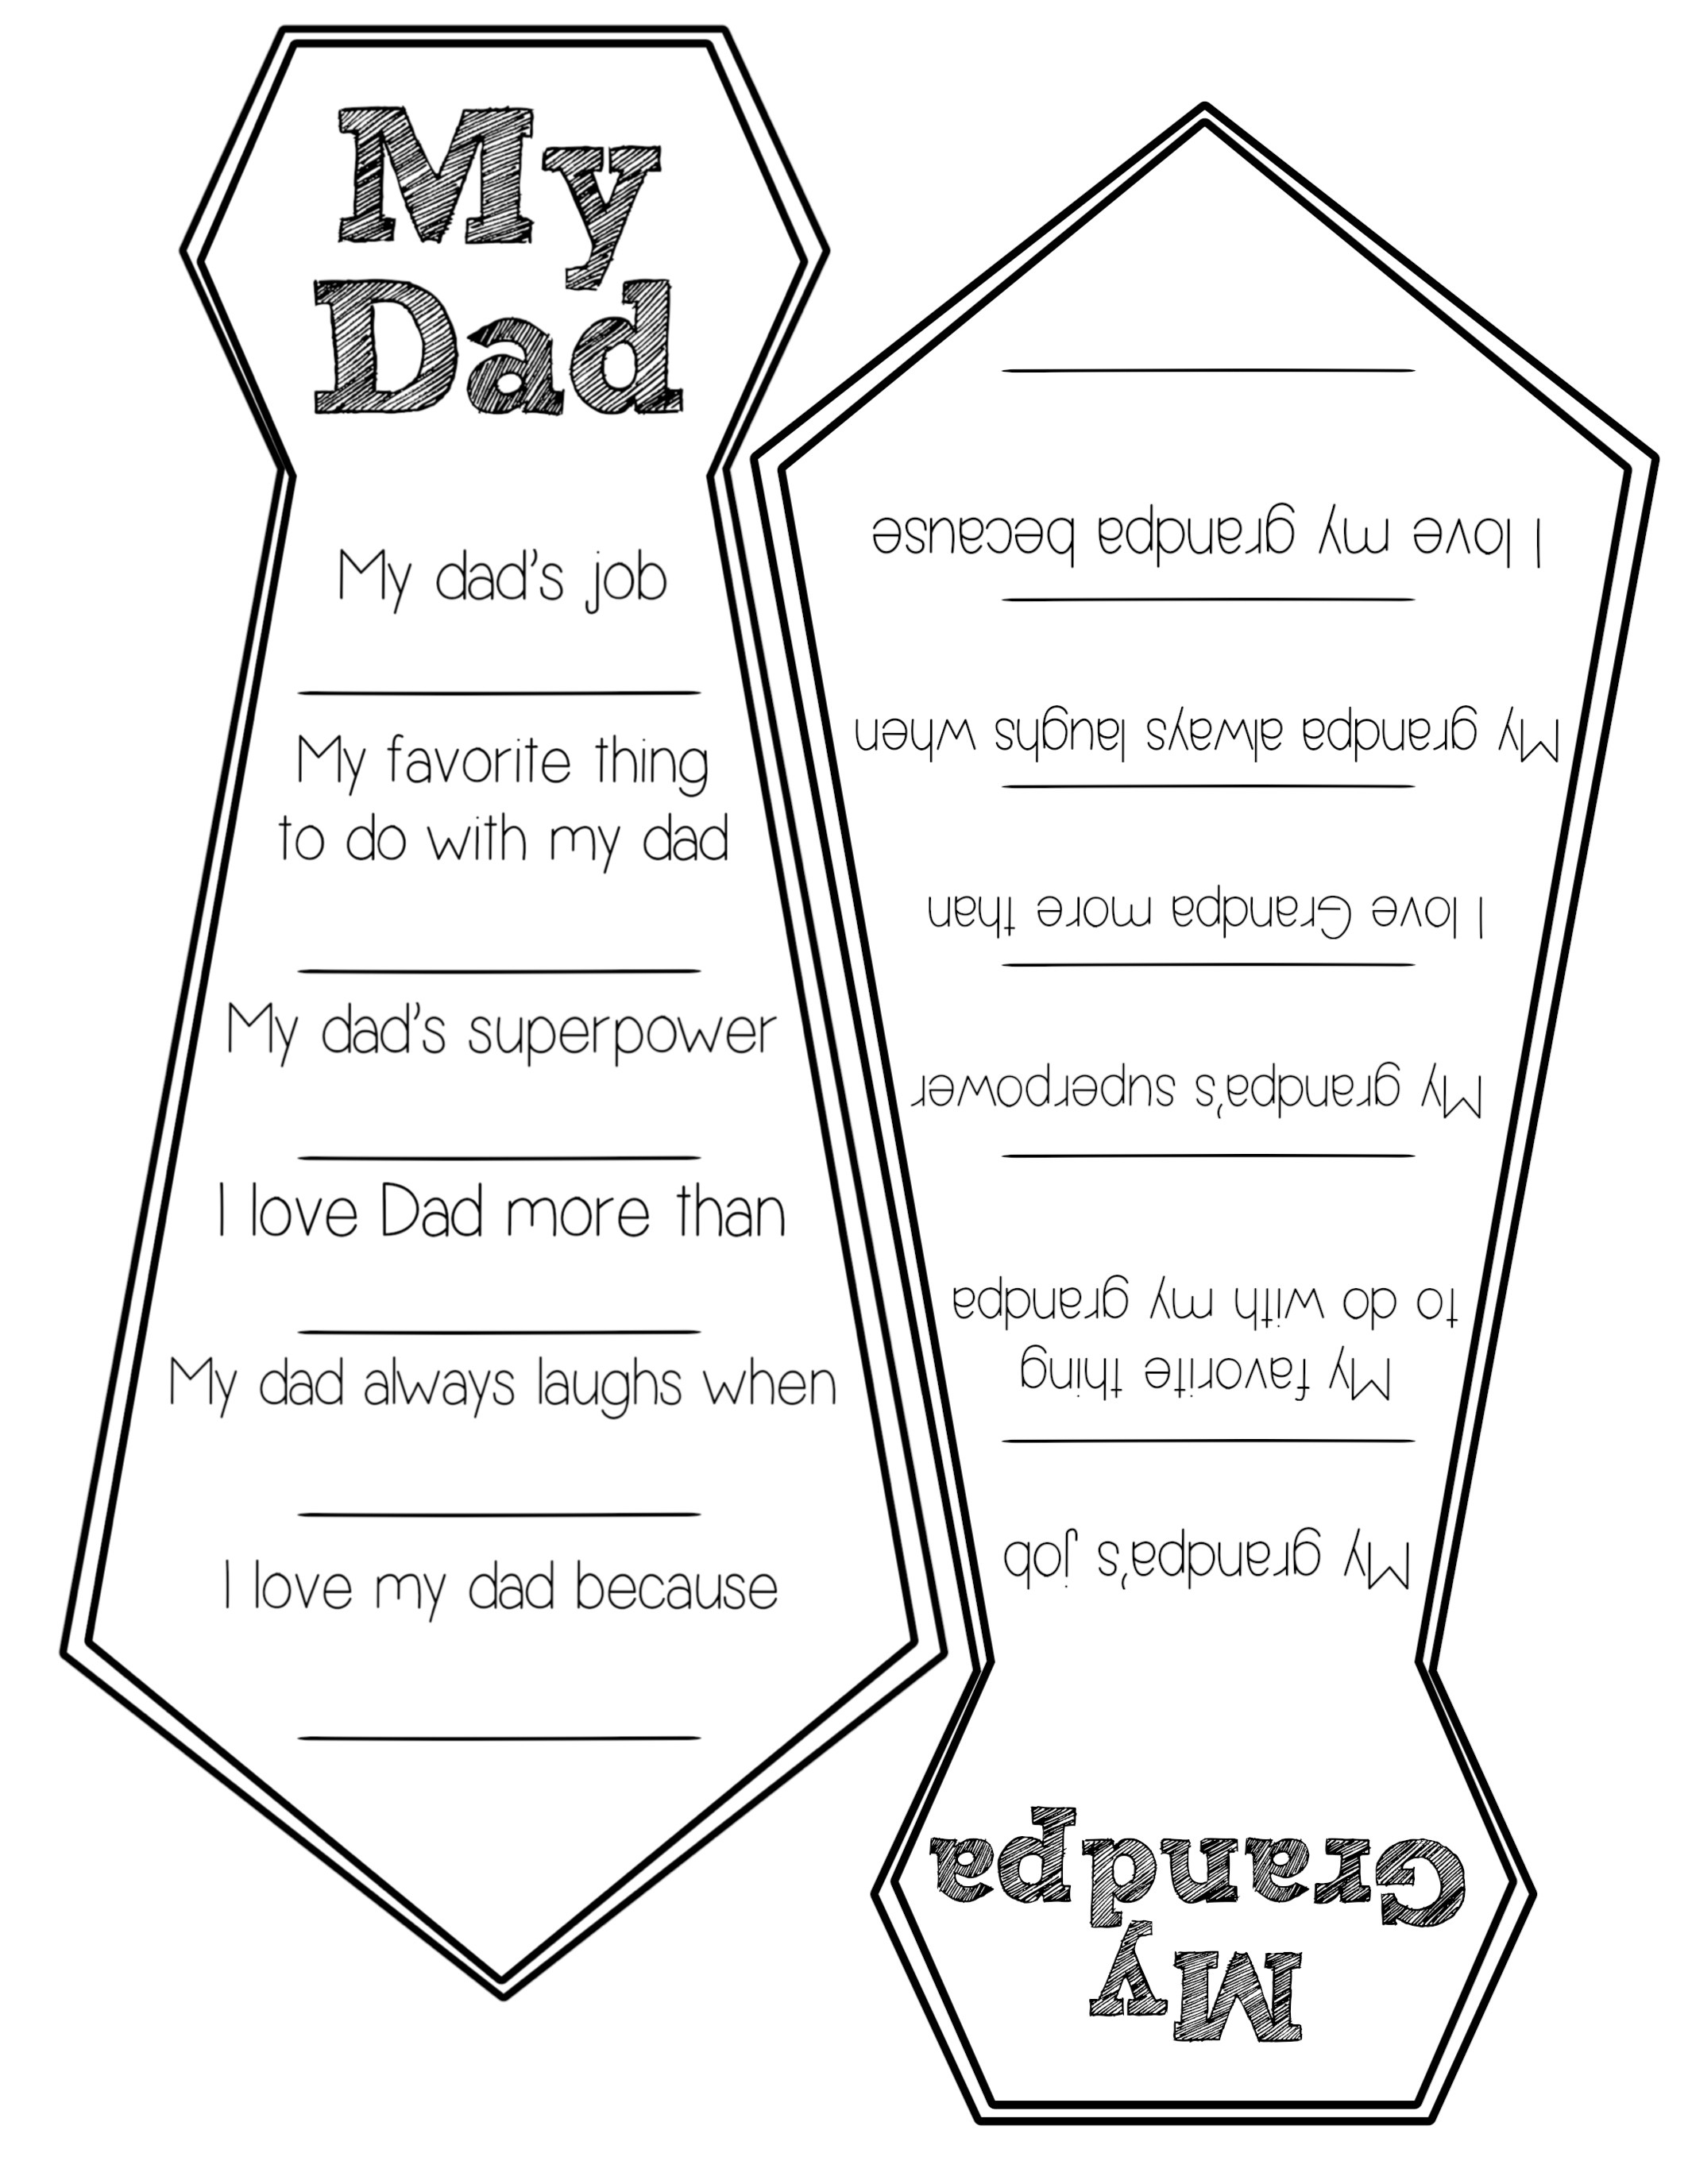 Father&amp;#039;s Day Free Printable Cards - Paper Trail Design | Teacher - Free Printable Fathers Day Cards